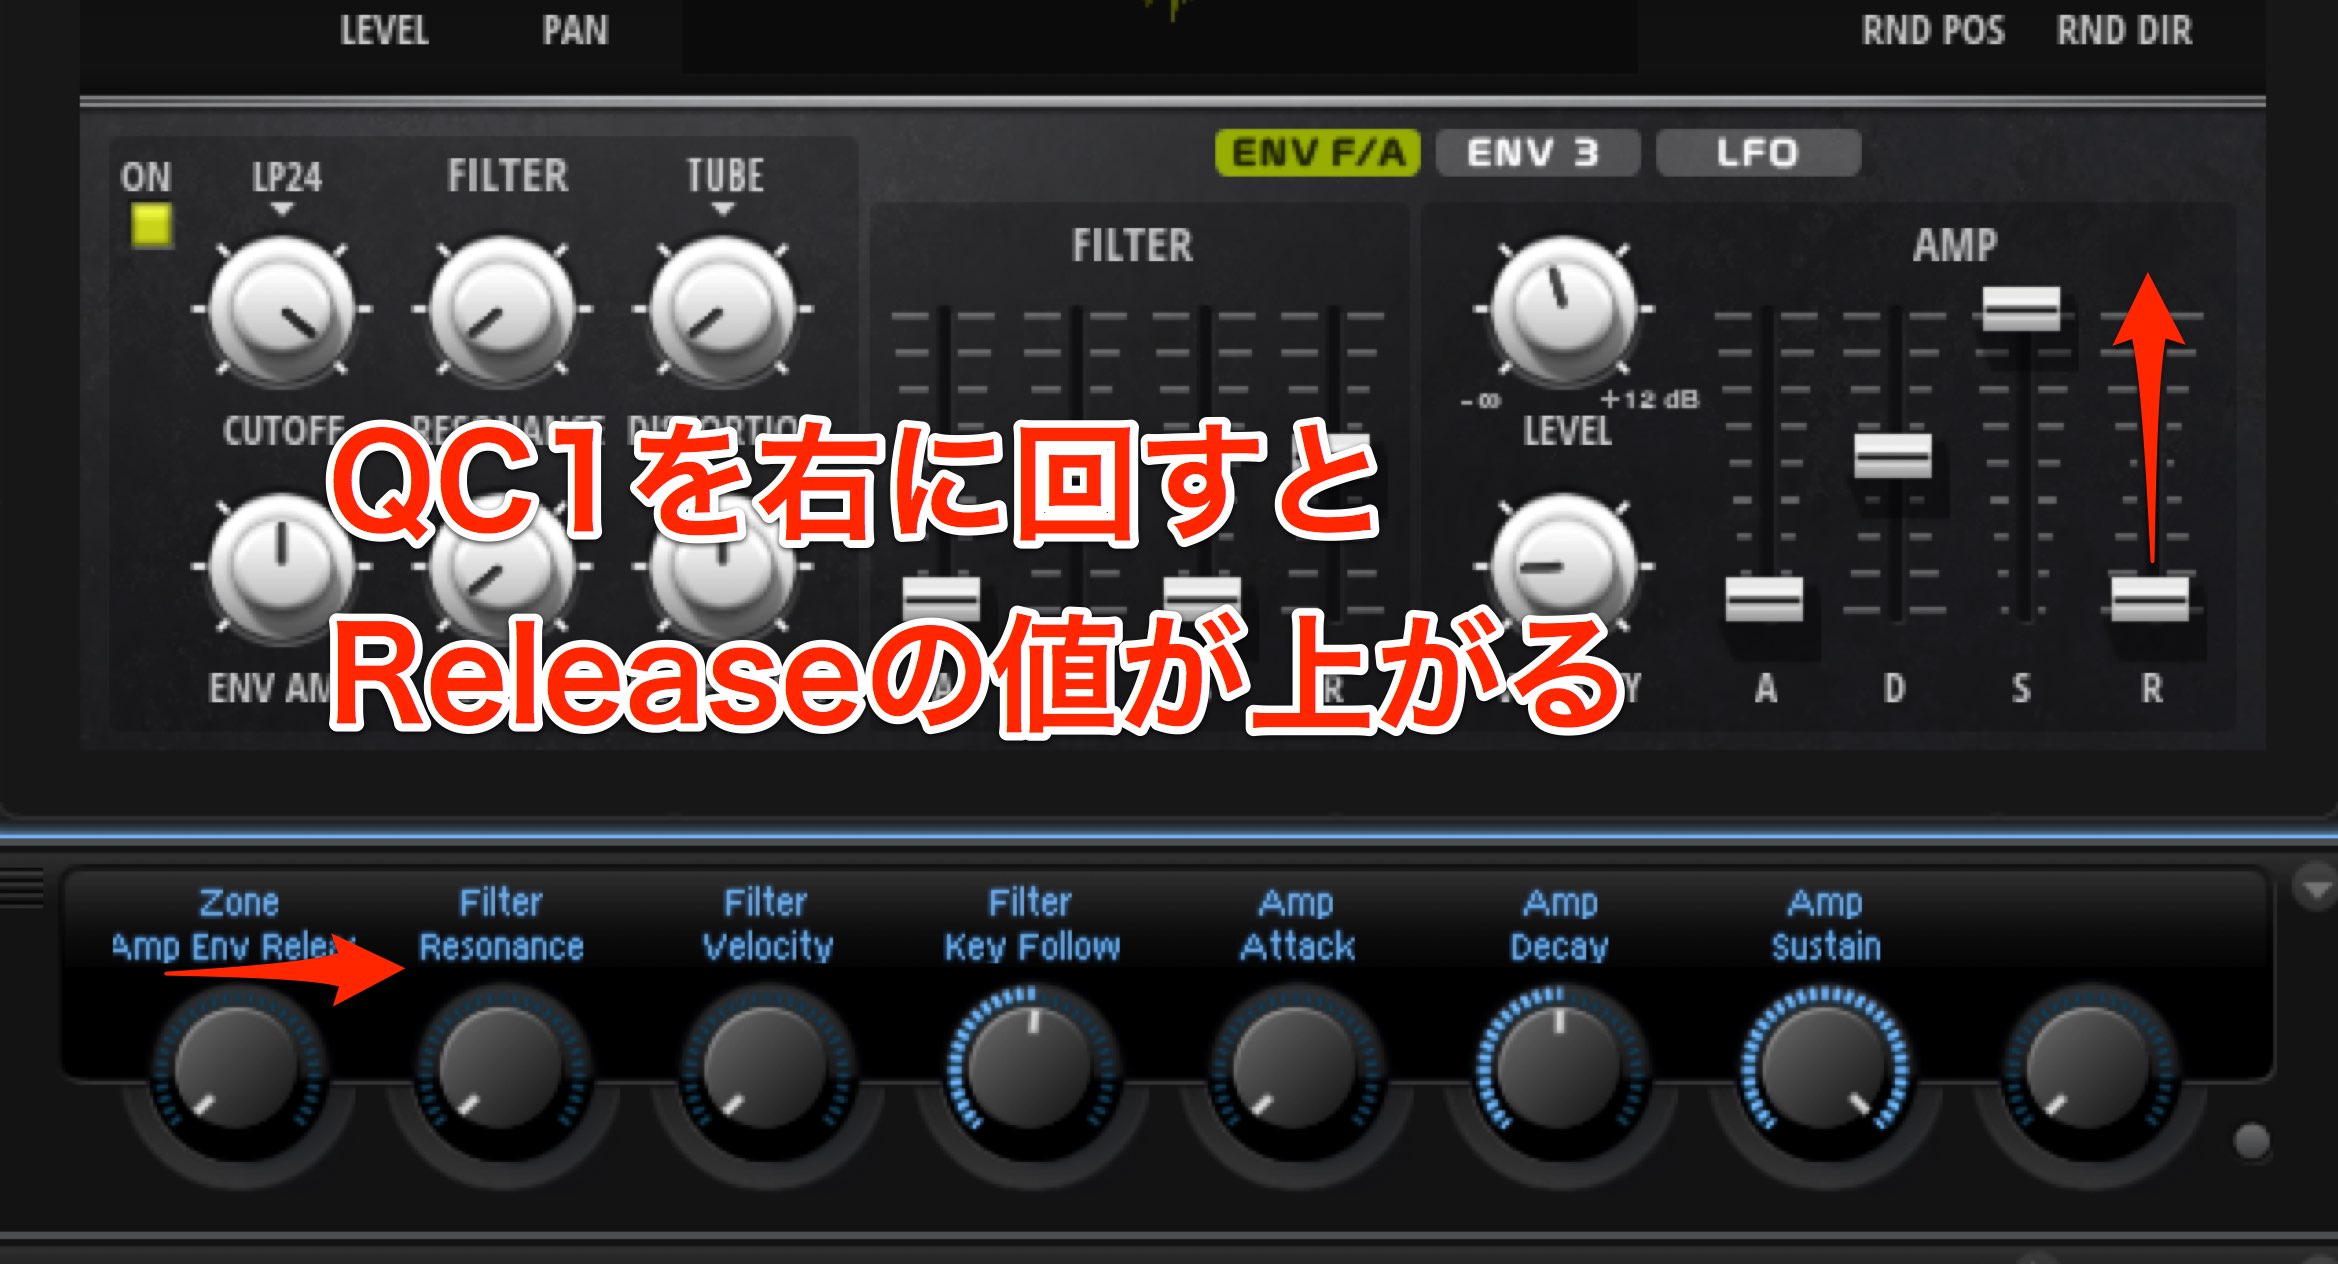 Releaseの値